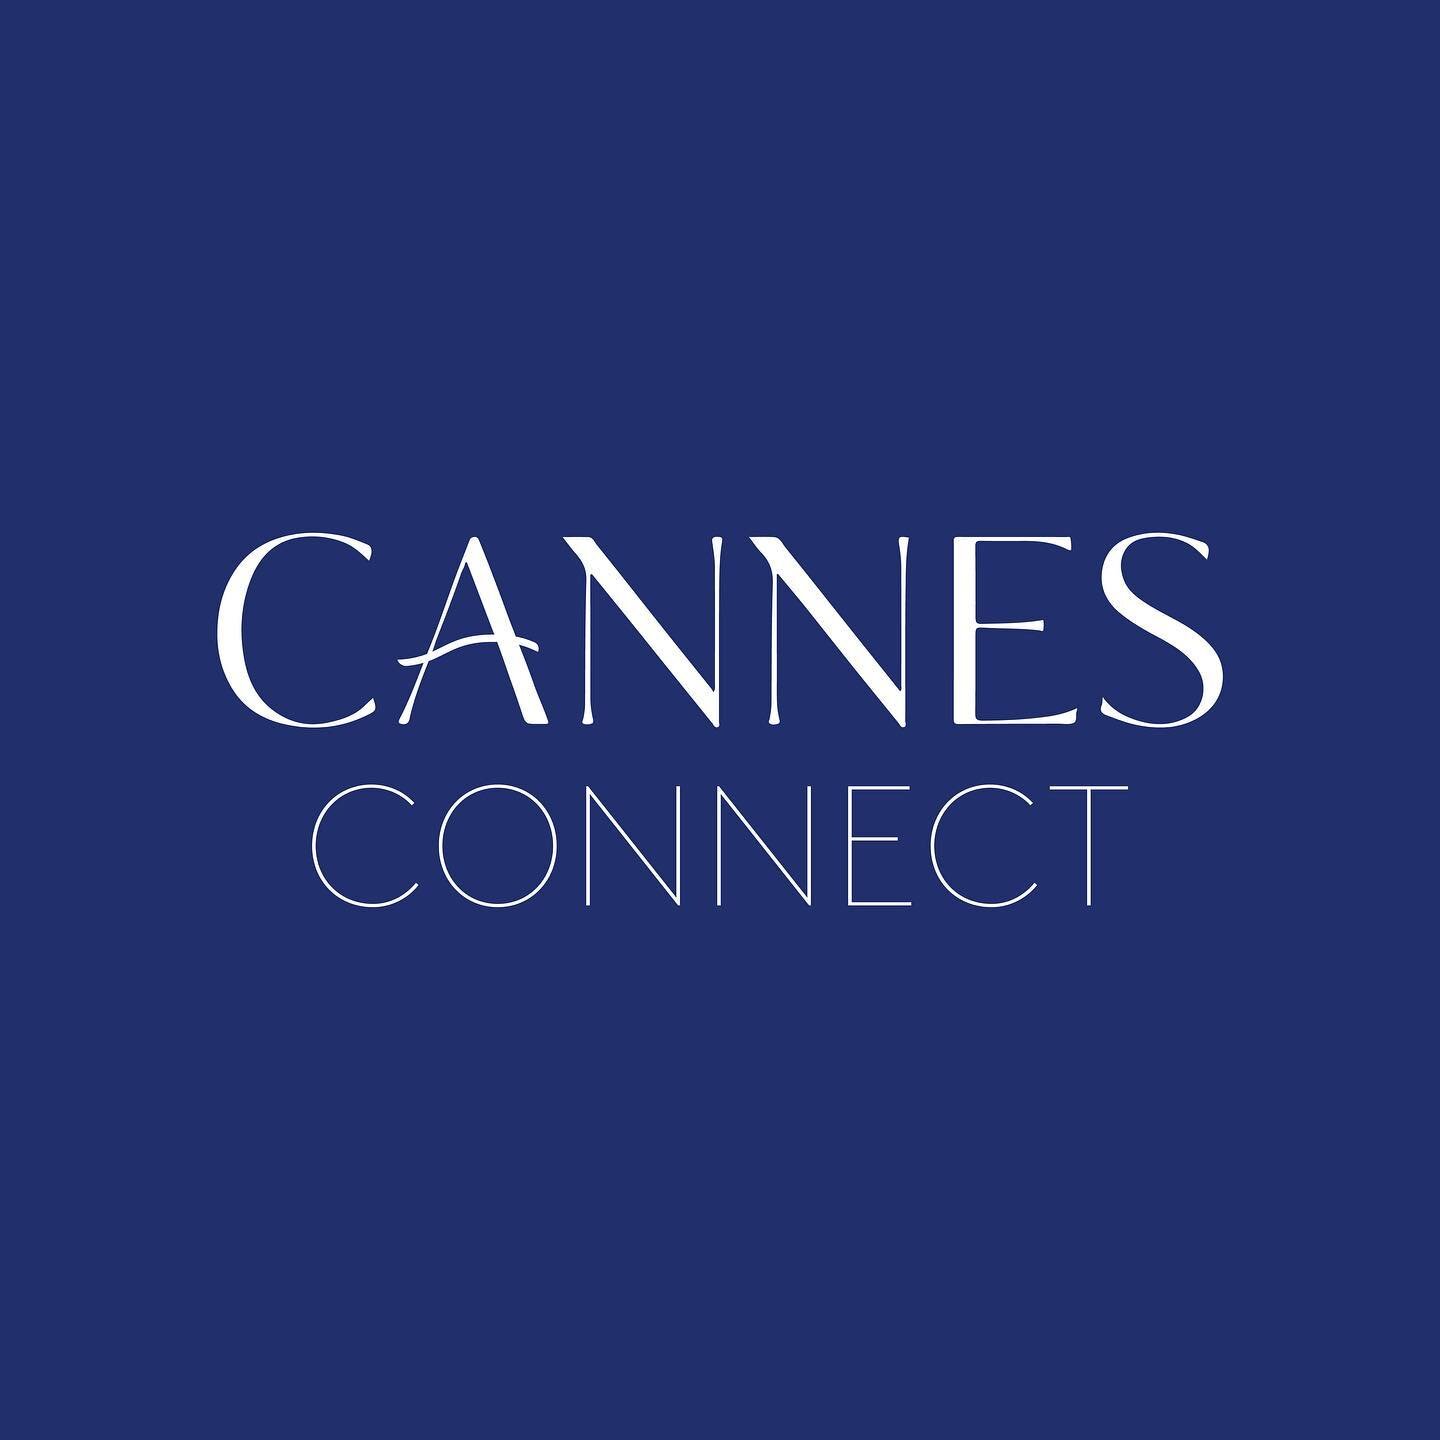 Cannes Connect, your multimedia hub for Cannes&rsquo;s culture, businesses, people, festivals, and events. 

Stay tuned to enhance your experience with us. More to come. 🤫

_________

Cannes Connect: LA destination de r&eacute;f&eacute;rence d&eacut